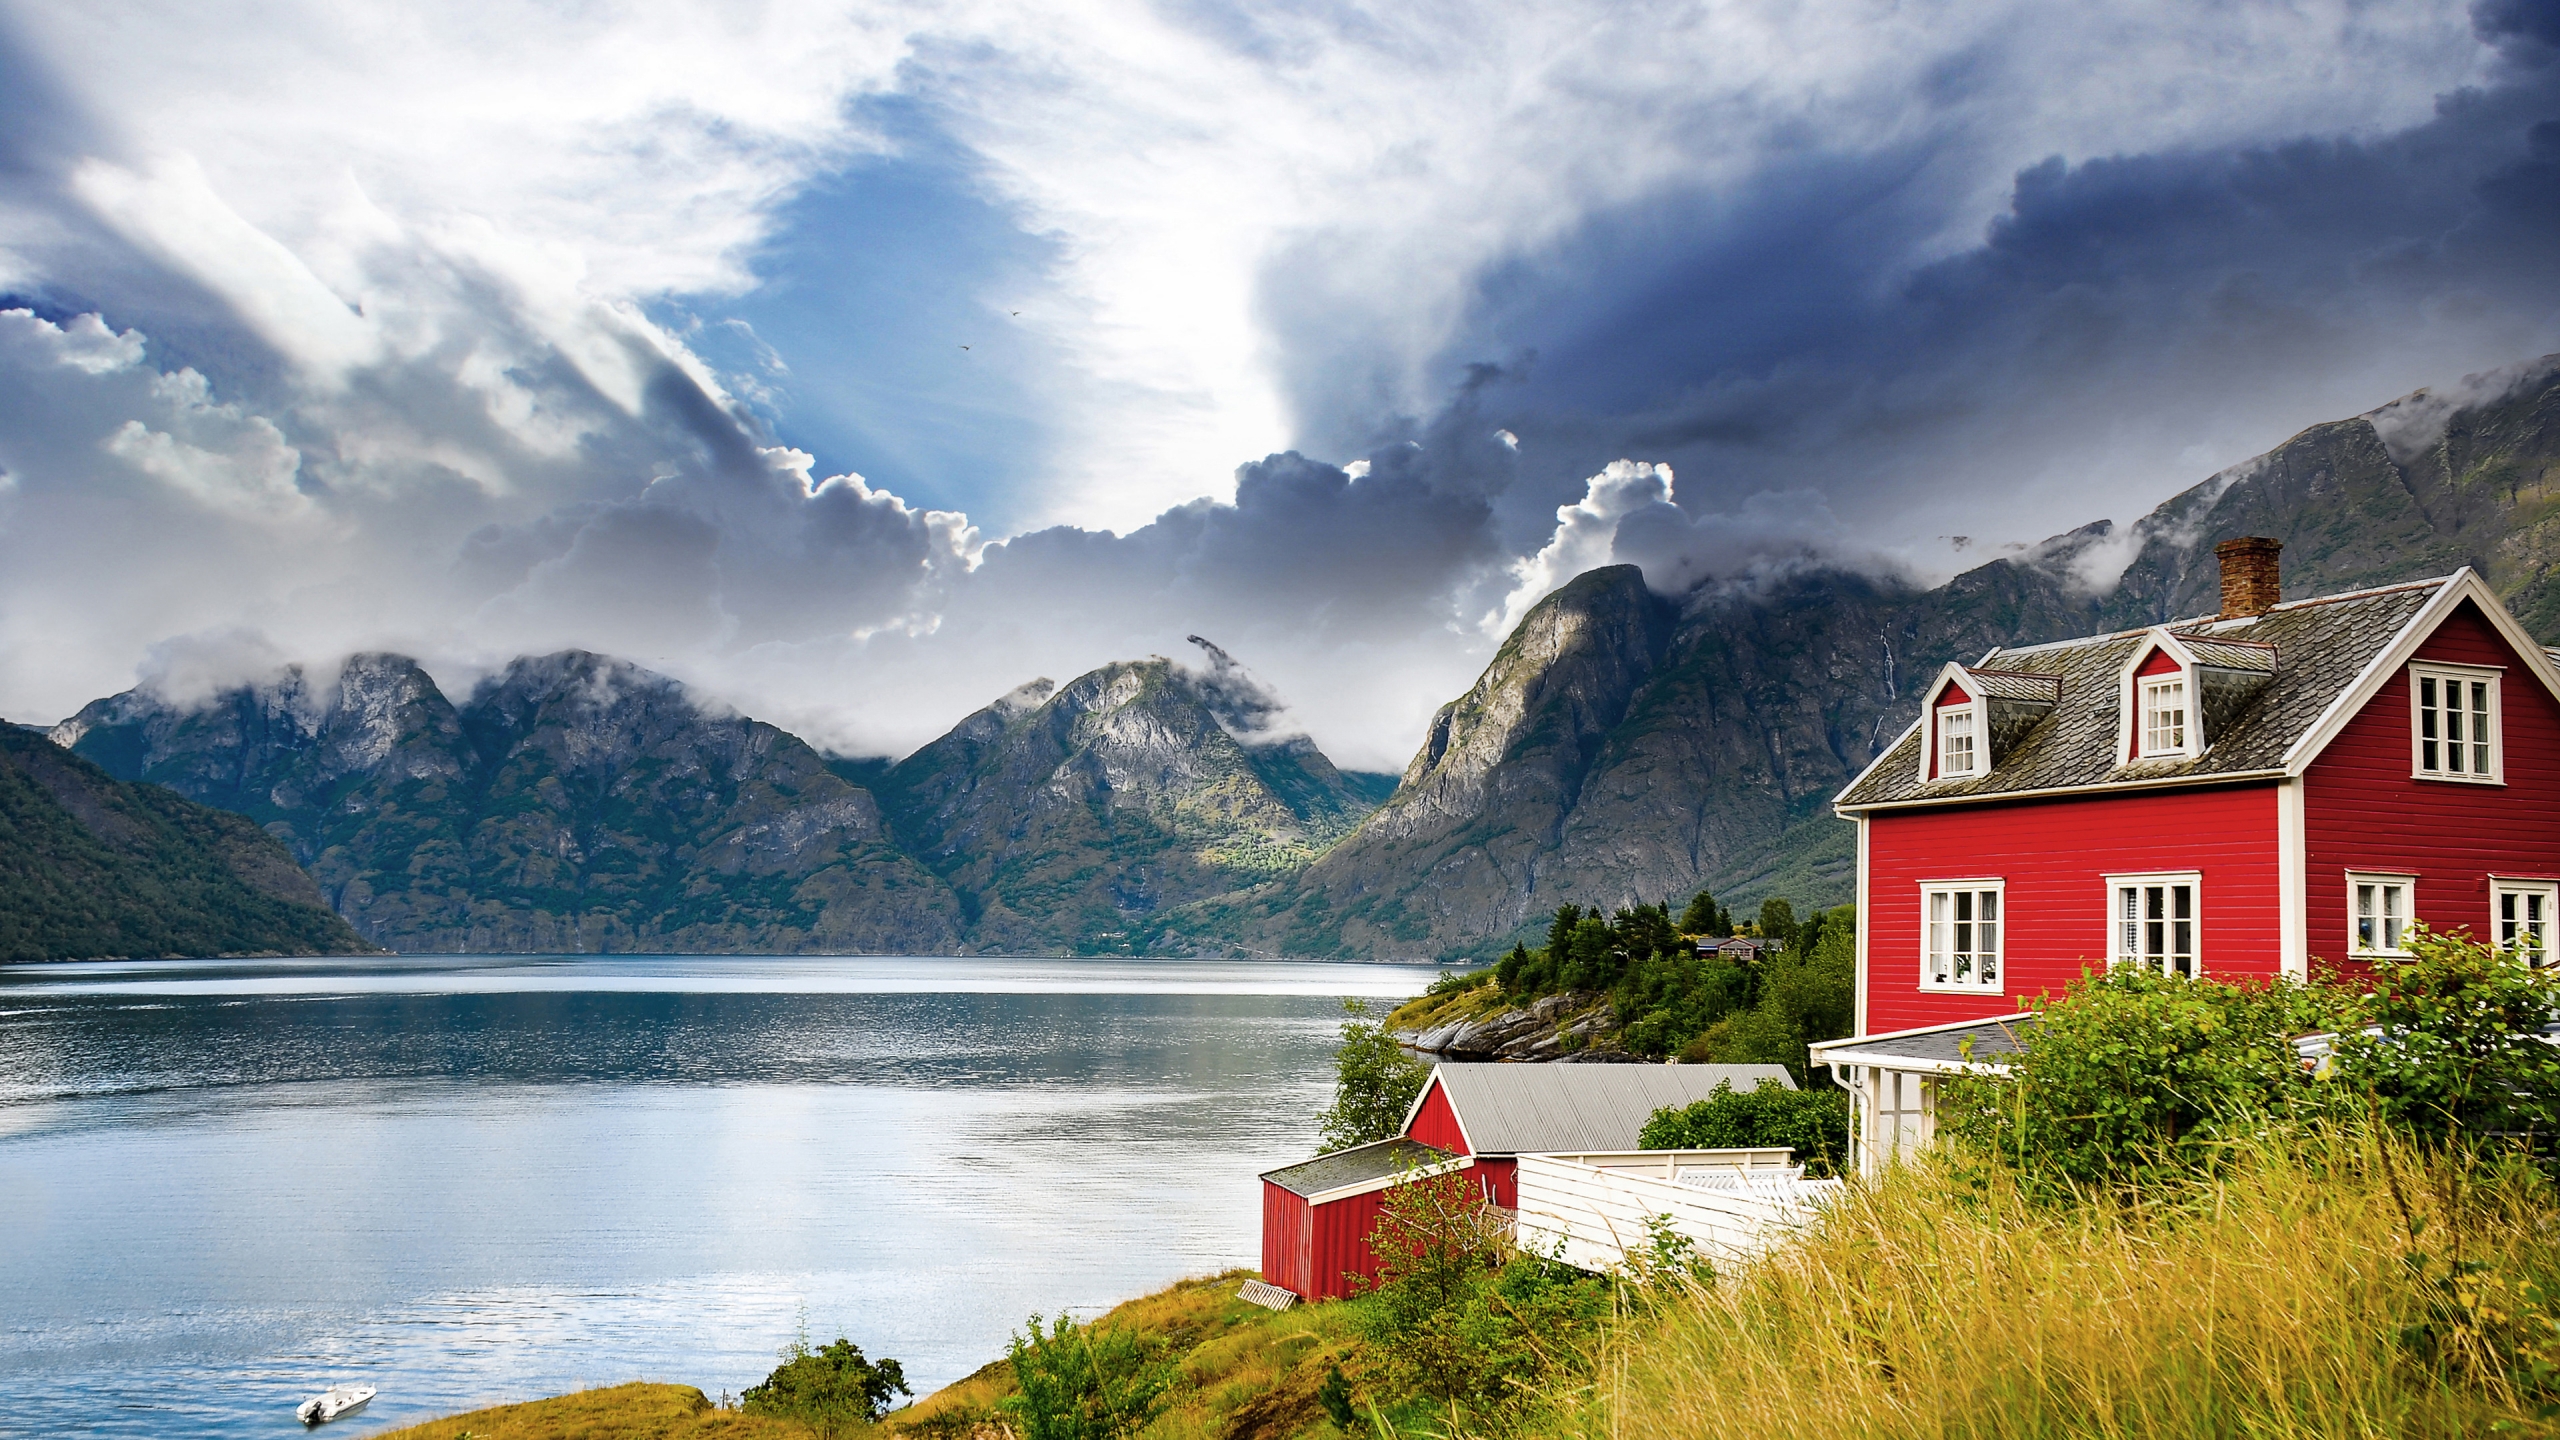 Norway Landscape for 2560x1440 HDTV resolution